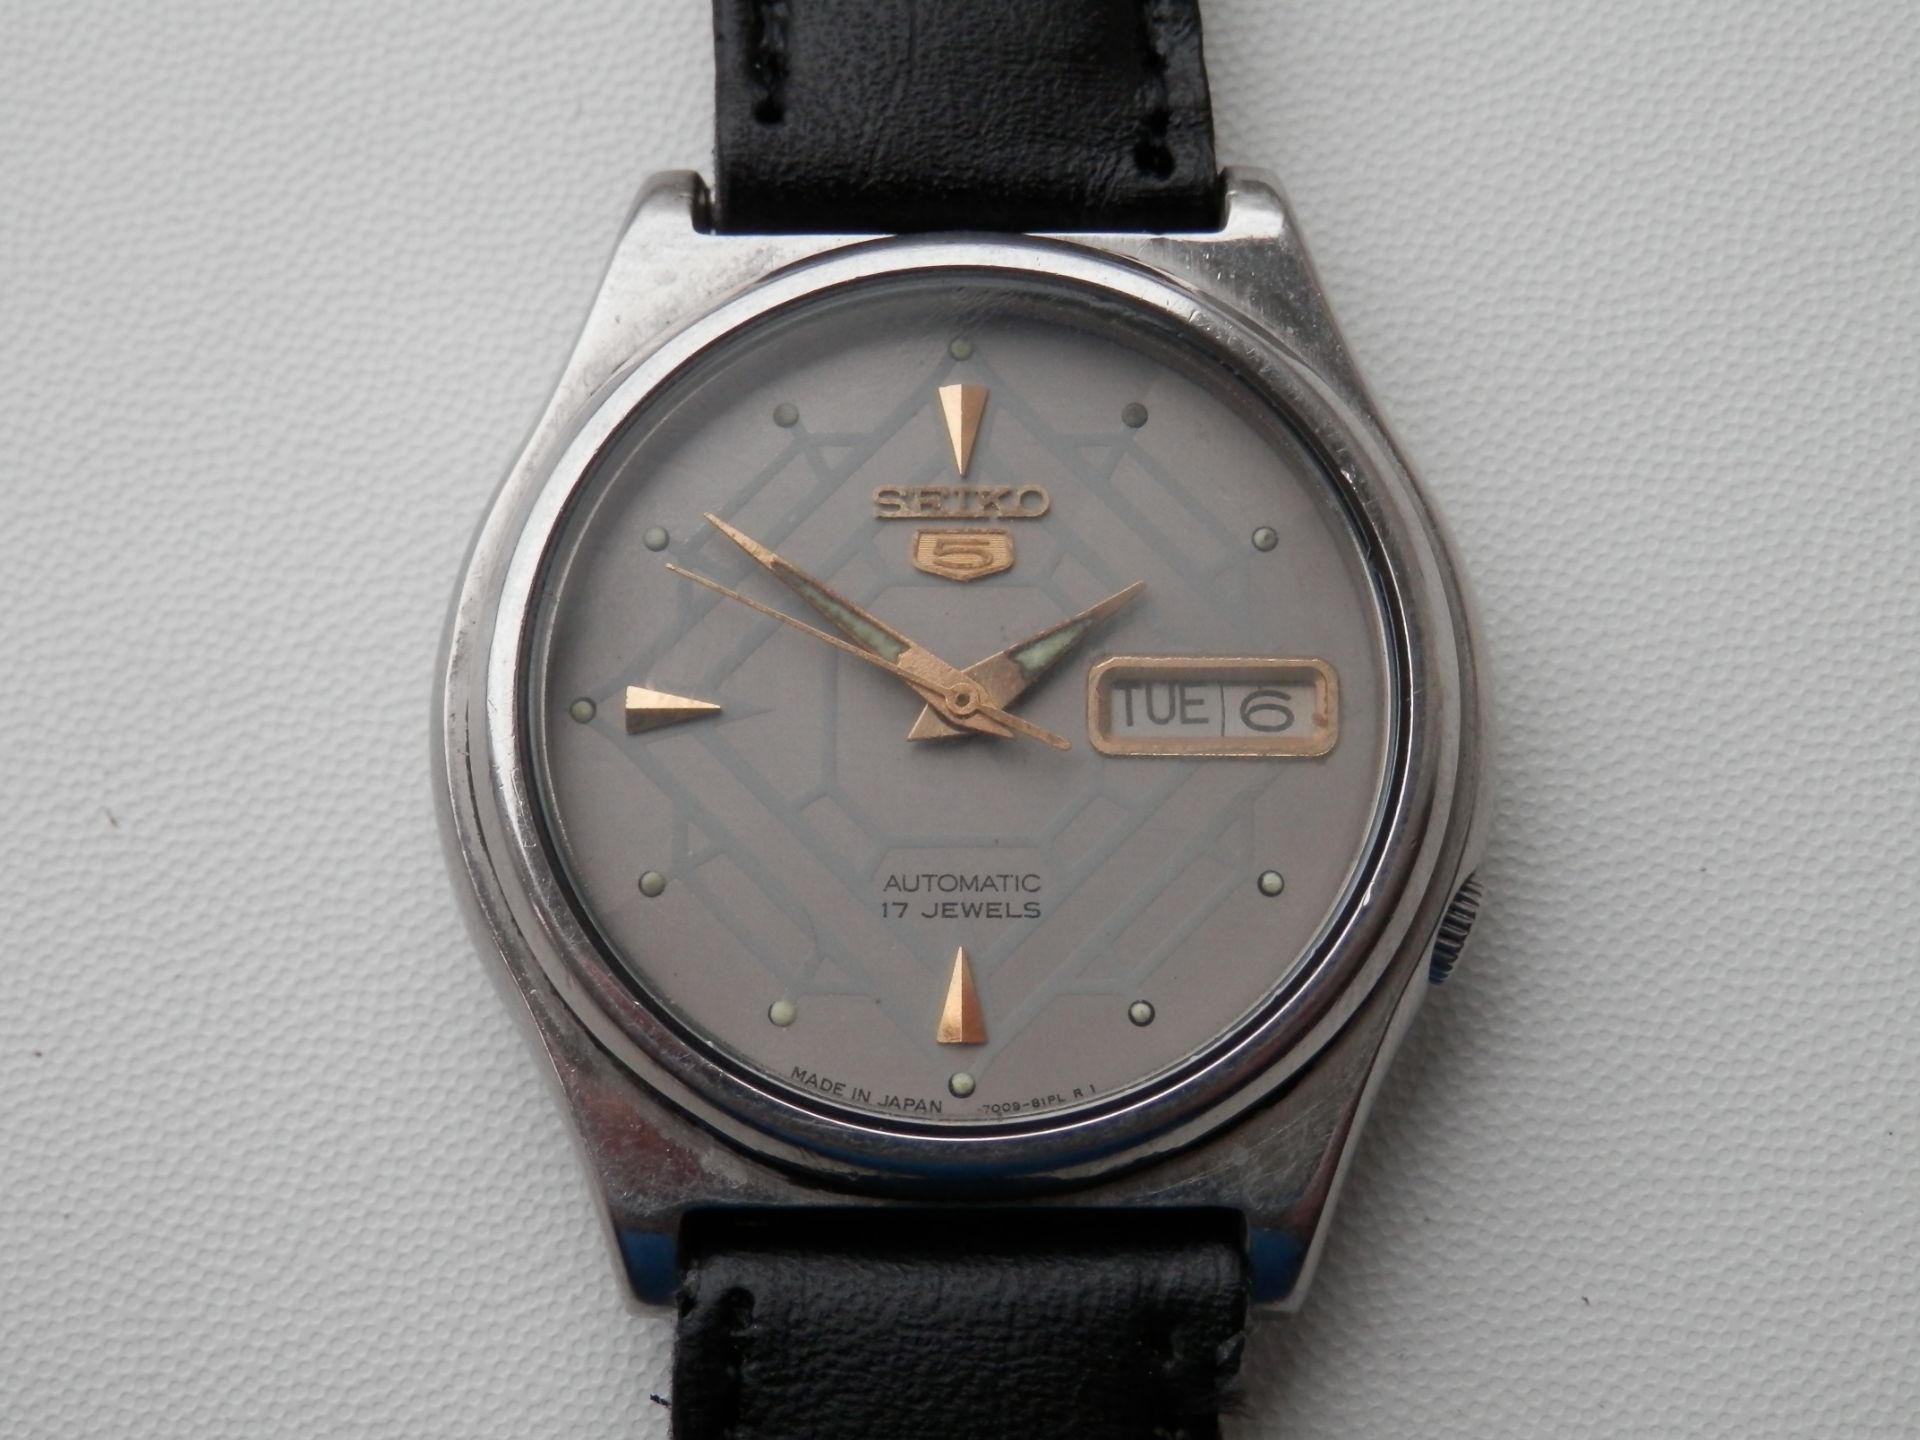 1984 WORKING SEIKO 7009 AUTOMATIC 17 JEWEL DAY/DATE WATCH, STAINLESS CASE. - Image 3 of 18